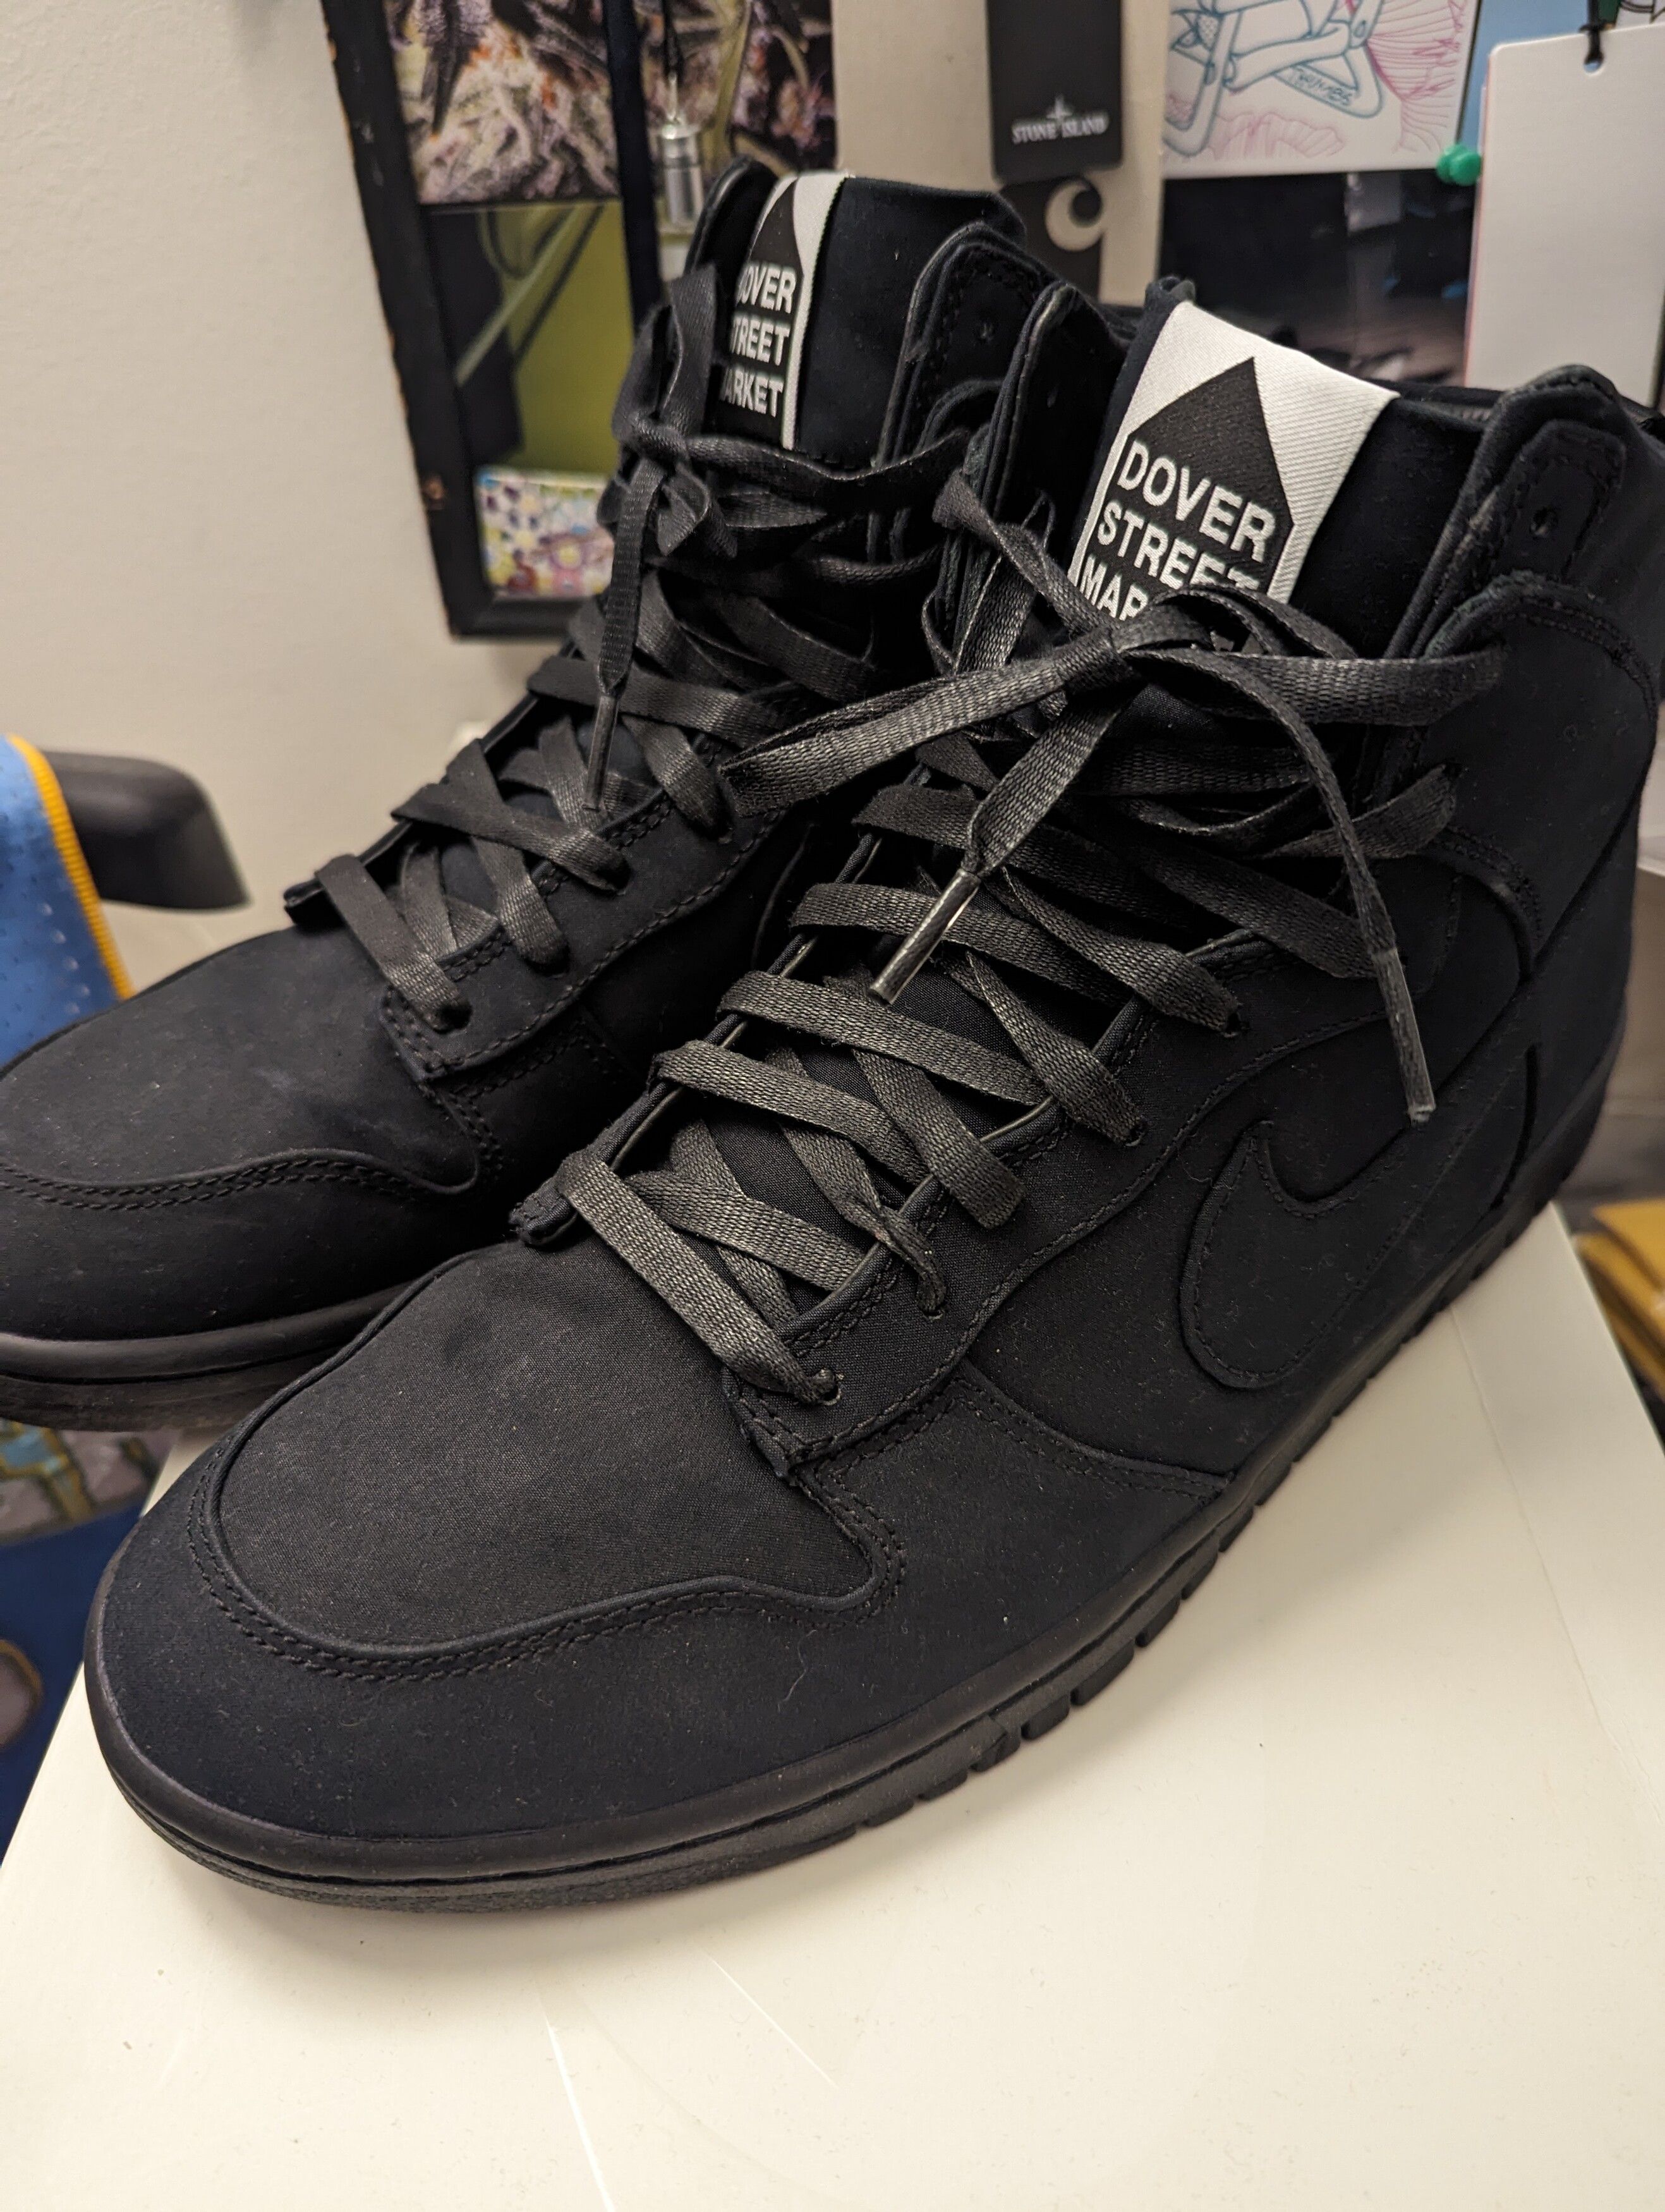 Nike Nike Dunk Lux SP High Dover Street Market Black Size US 10.5 / EU 43-44 - 1 Preview